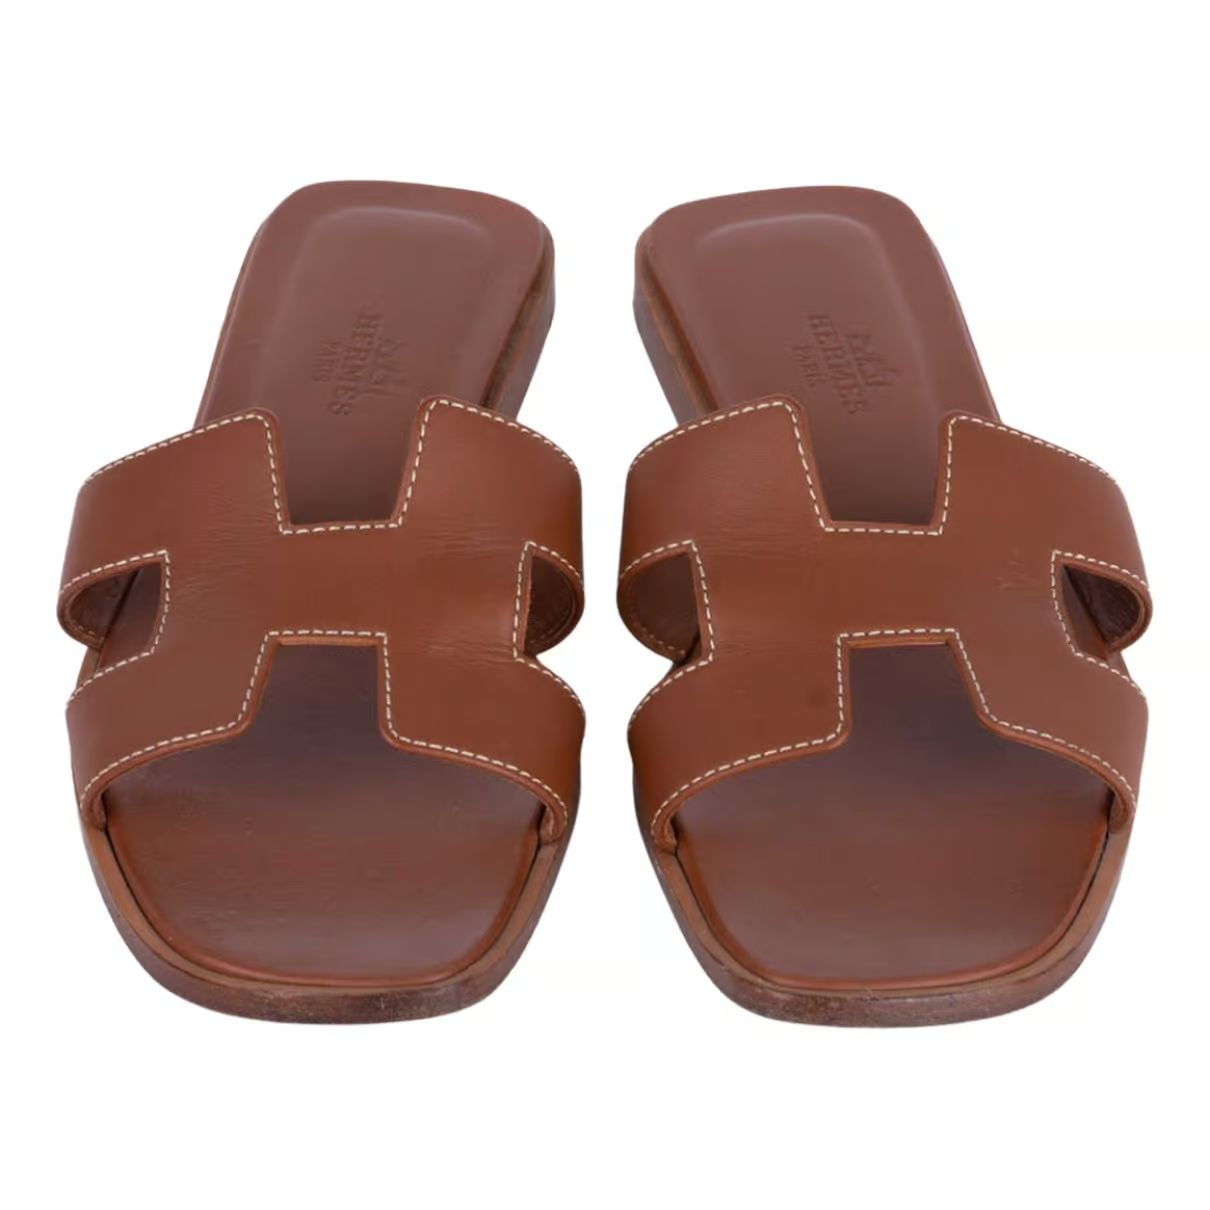 Hermès Oran Sandals for Women | Buy or Sell Designer women's shoes! - Vestiaire Collective | Vestiaire Collective (Global)